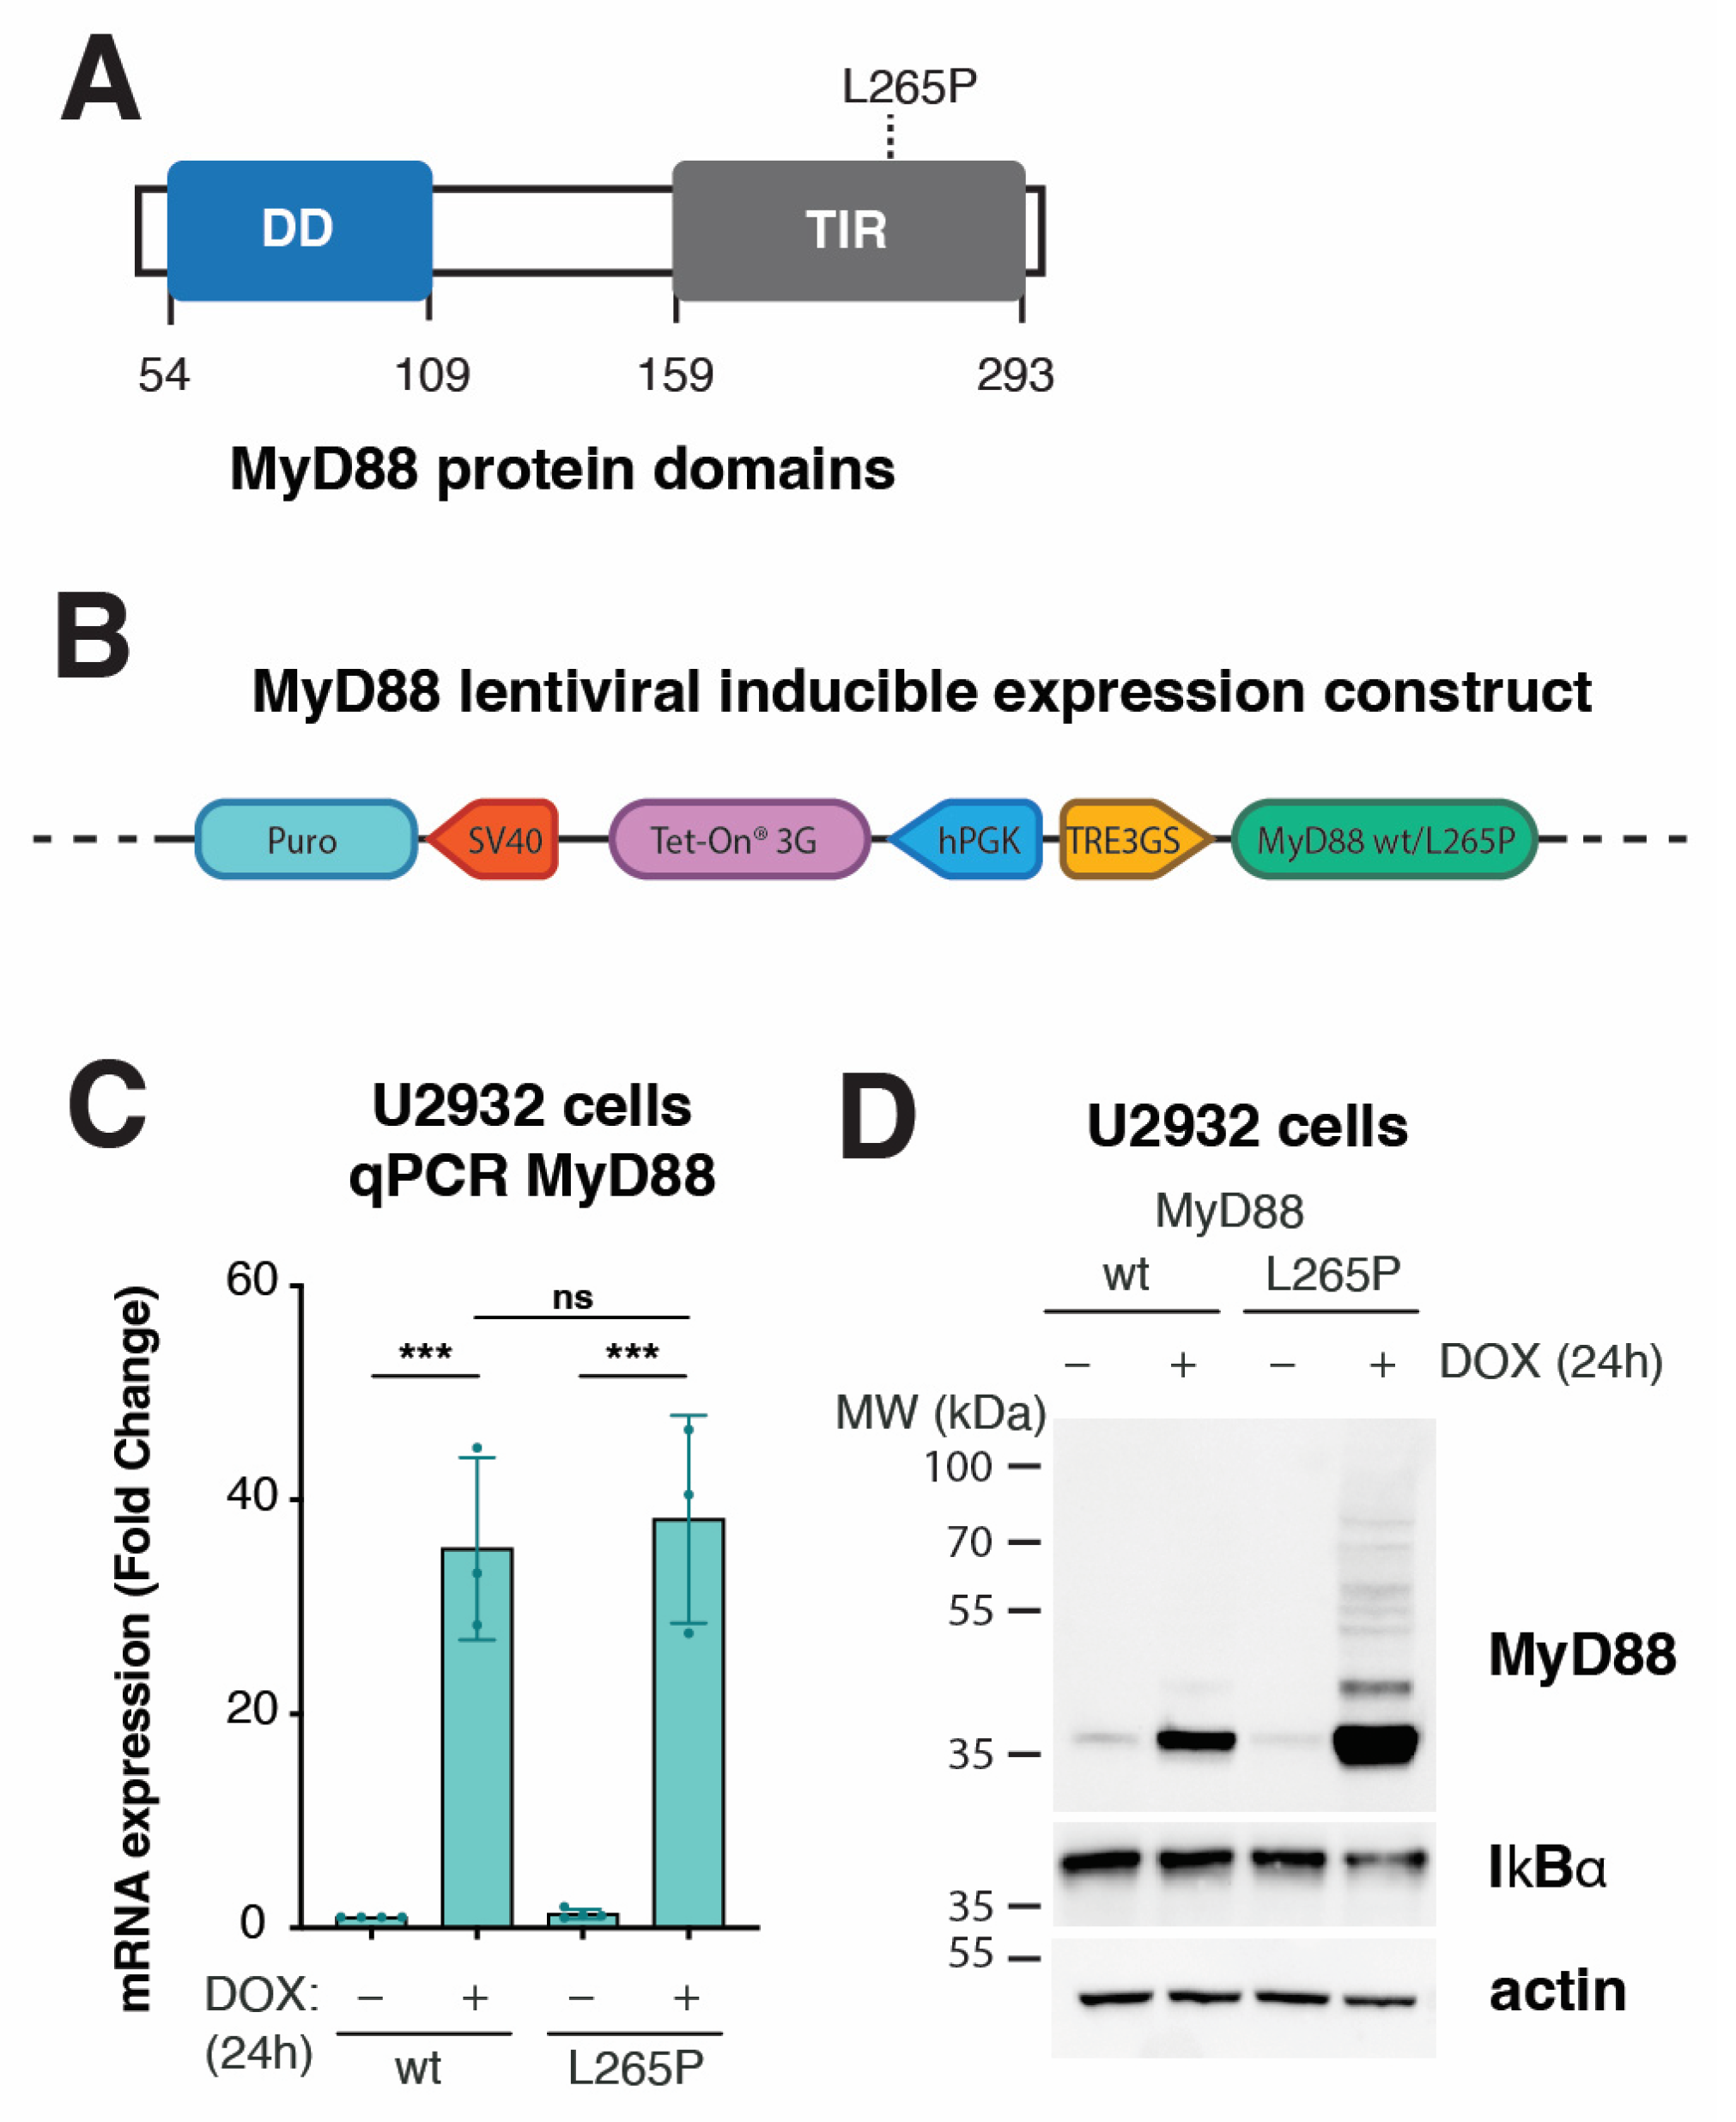 IJMS | Free Full-Text | Transcriptome Analysis of Diffuse Large B-Cell  Lymphoma Cells Inducibly Expressing MyD88 L265P Mutation Identifies  Upregulated CD44, LGALS3, NFKBIZ, and BATF as Downstream Targets of  Oncogenic NF-&kappa;B Signaling